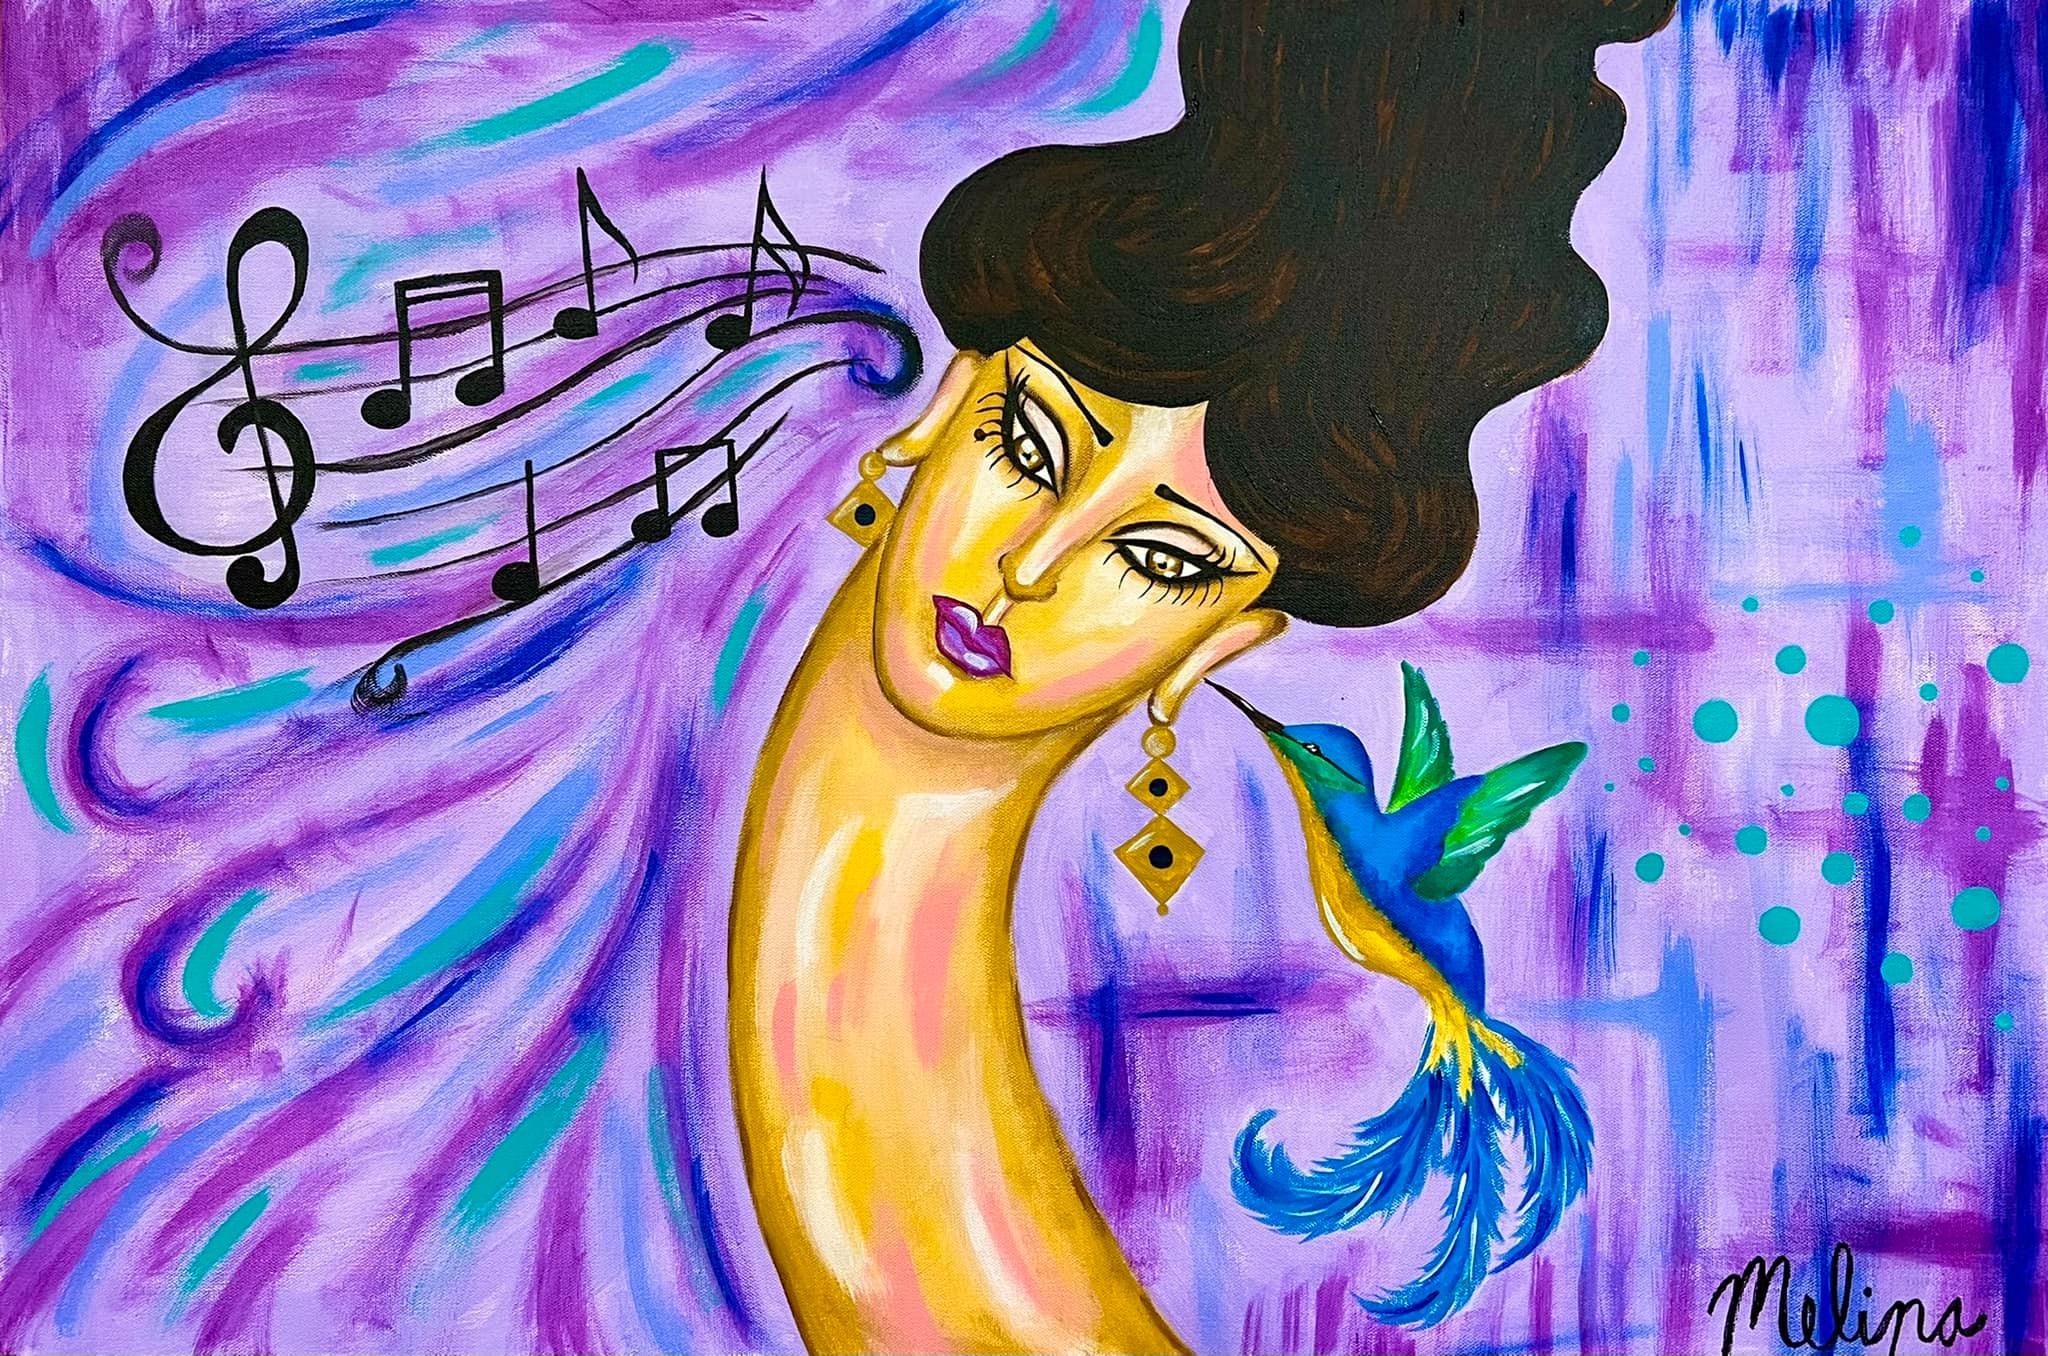 Sweet Song by Melina Sobi - Painting by Unknown